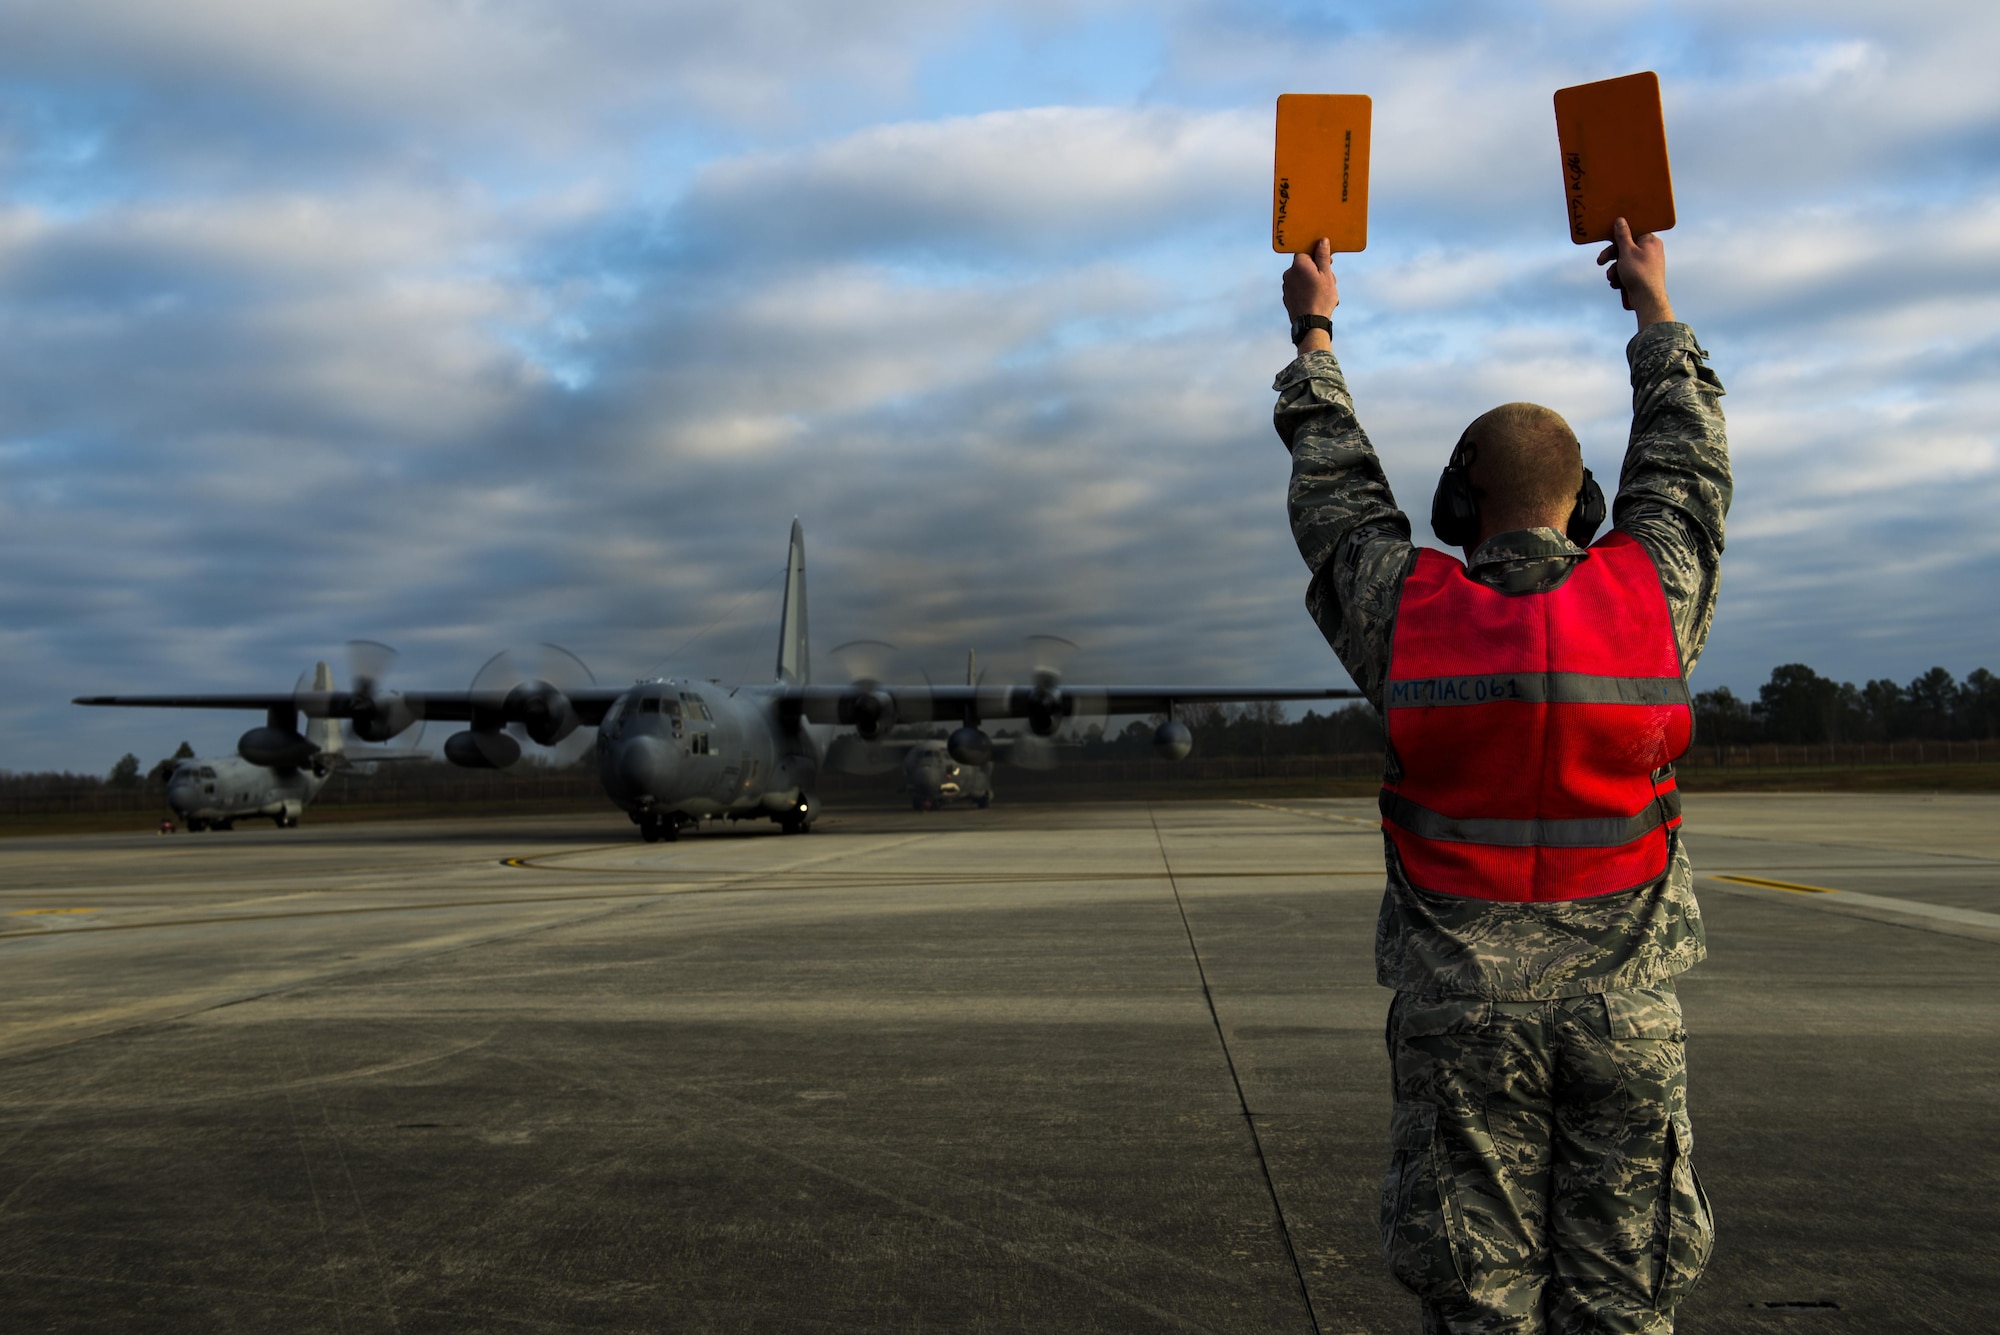 Airman 1st Class Cameron Miller marshals aircraft 62-1863 ‘Iron Horse’, an HC-130P Combat King, before takeoff Mar. 3, 2015, at Moody Air Force Base, Ga. Iron Horse has been stationed at Moody AFB since 2007 and is being flown to Davis-Monthan AFB, Ariz., for retirement. Miller is a 71st Aircraft Maintenance Unit crew chief. (U.S. Air Force photo/Airman 1st Class Dillian Bamman)